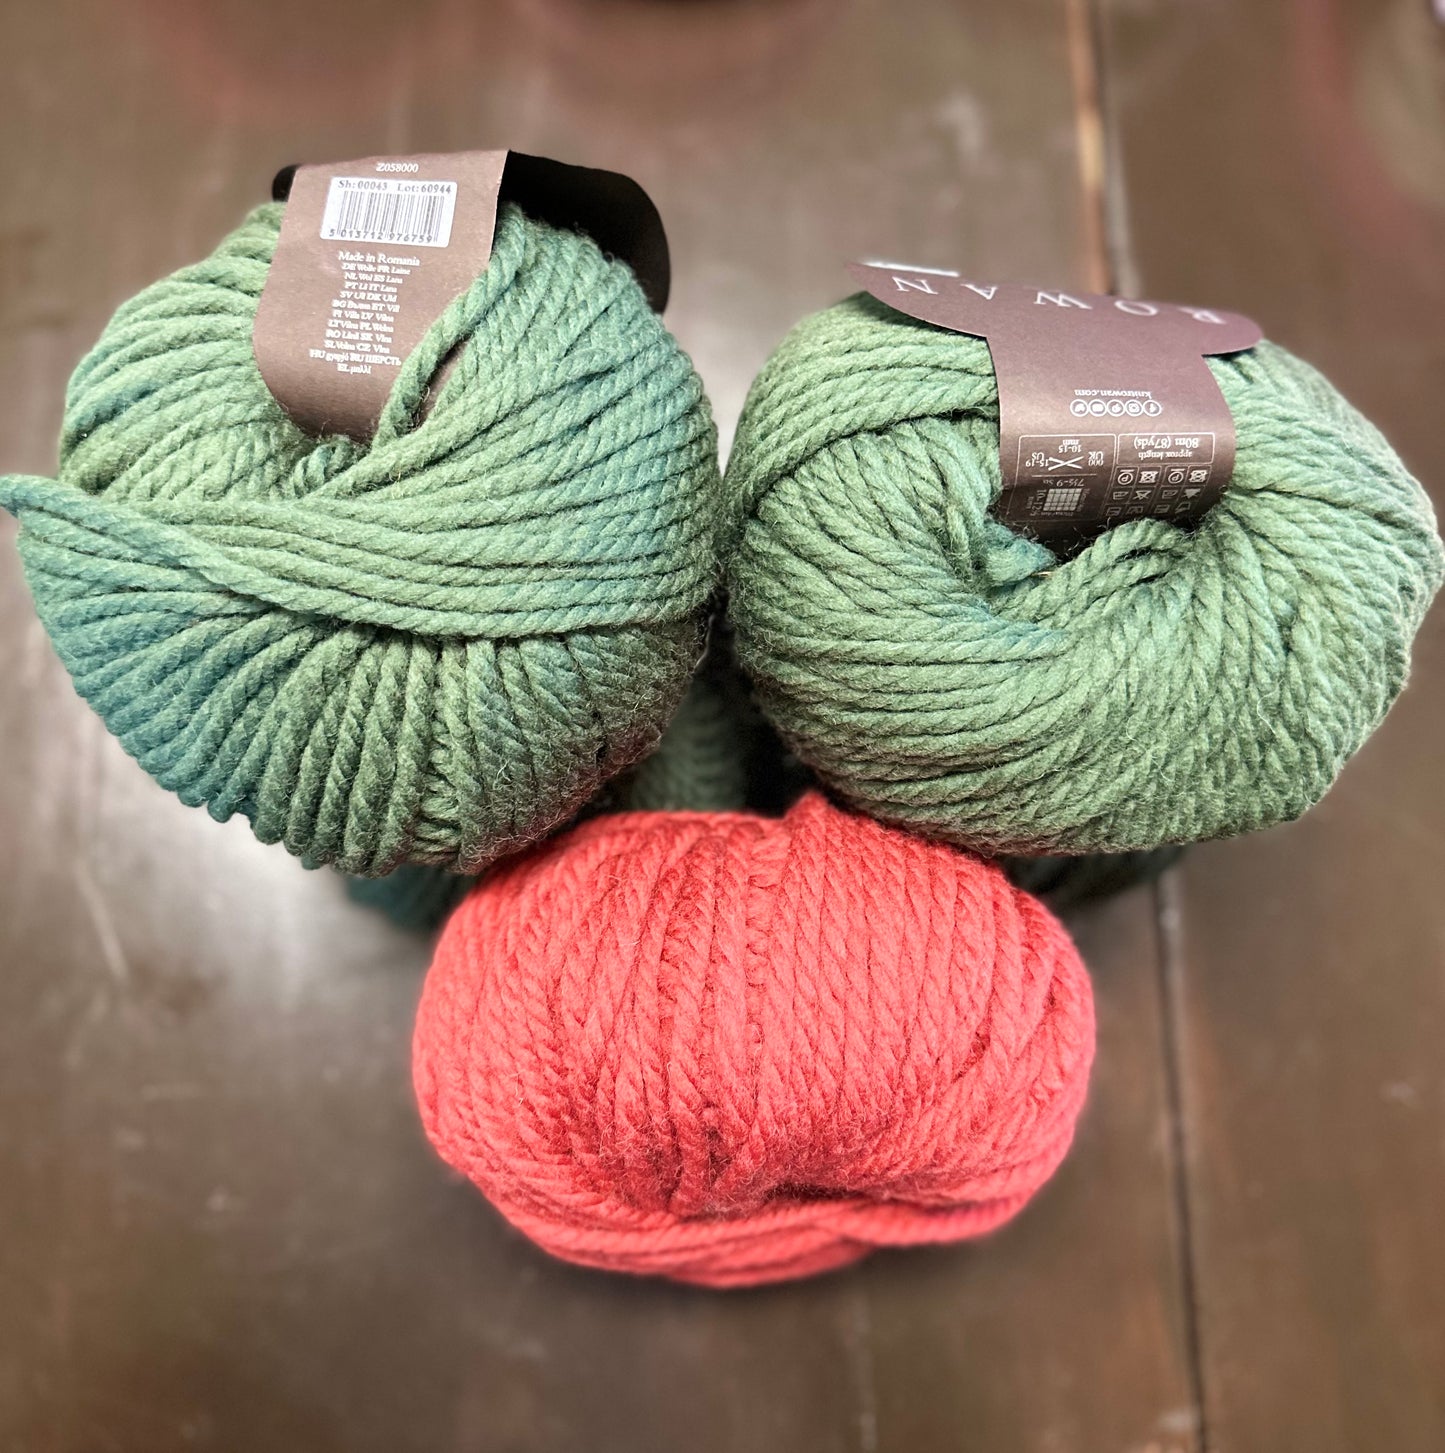 Winter Whimsy Sweater Kits